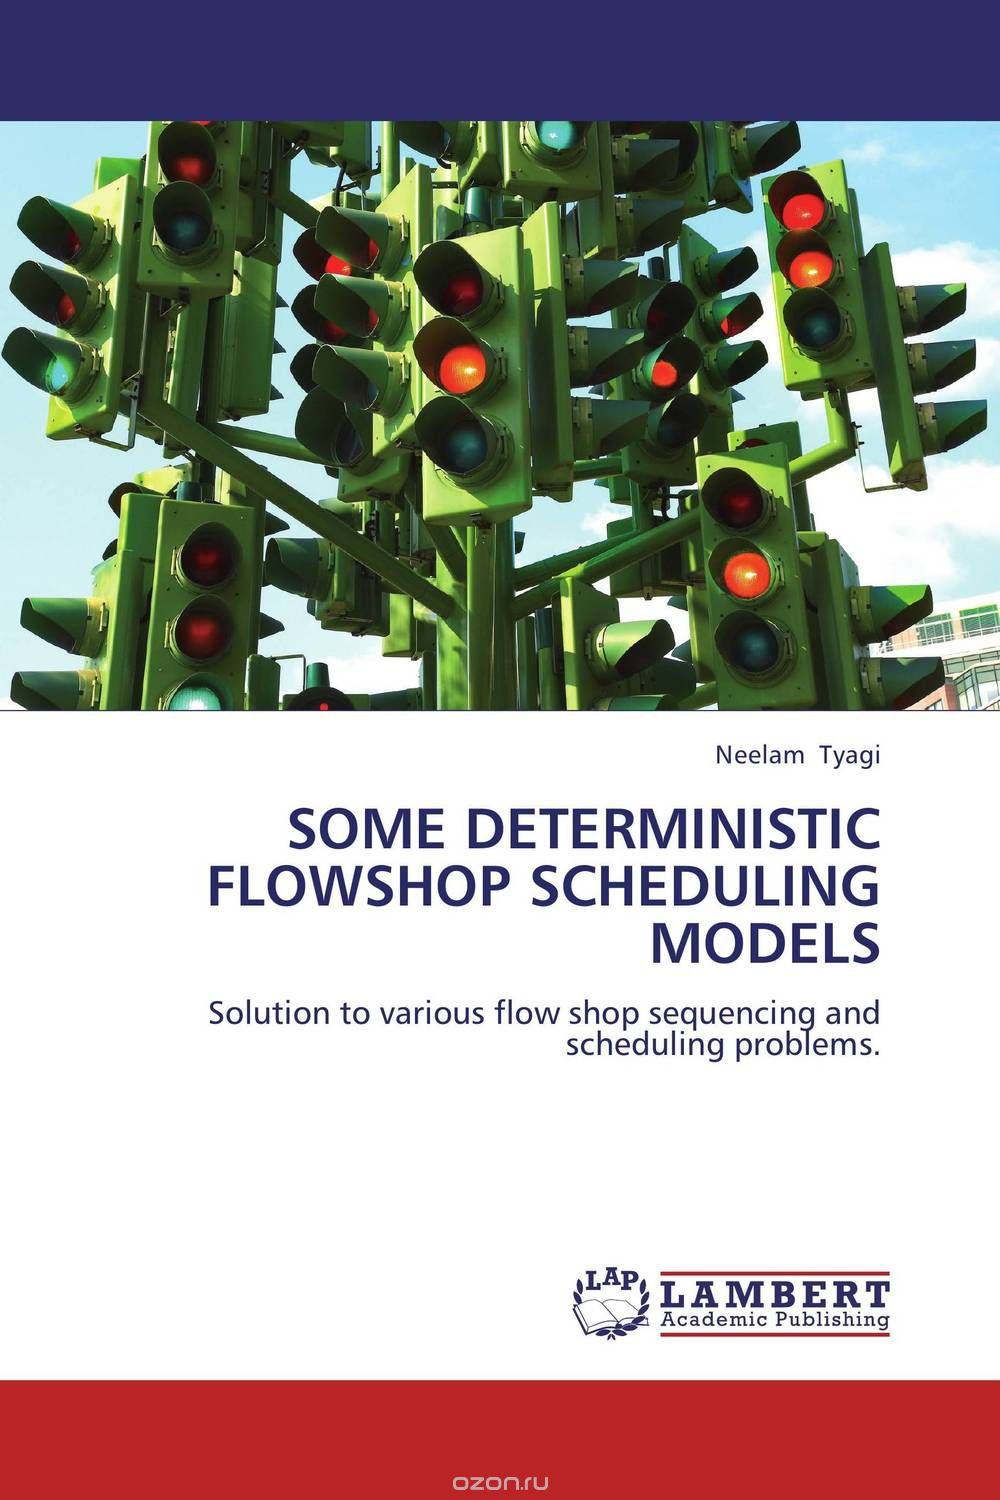 SOME DETERMINISTIC FLOWSHOP SCHEDULING MODELS